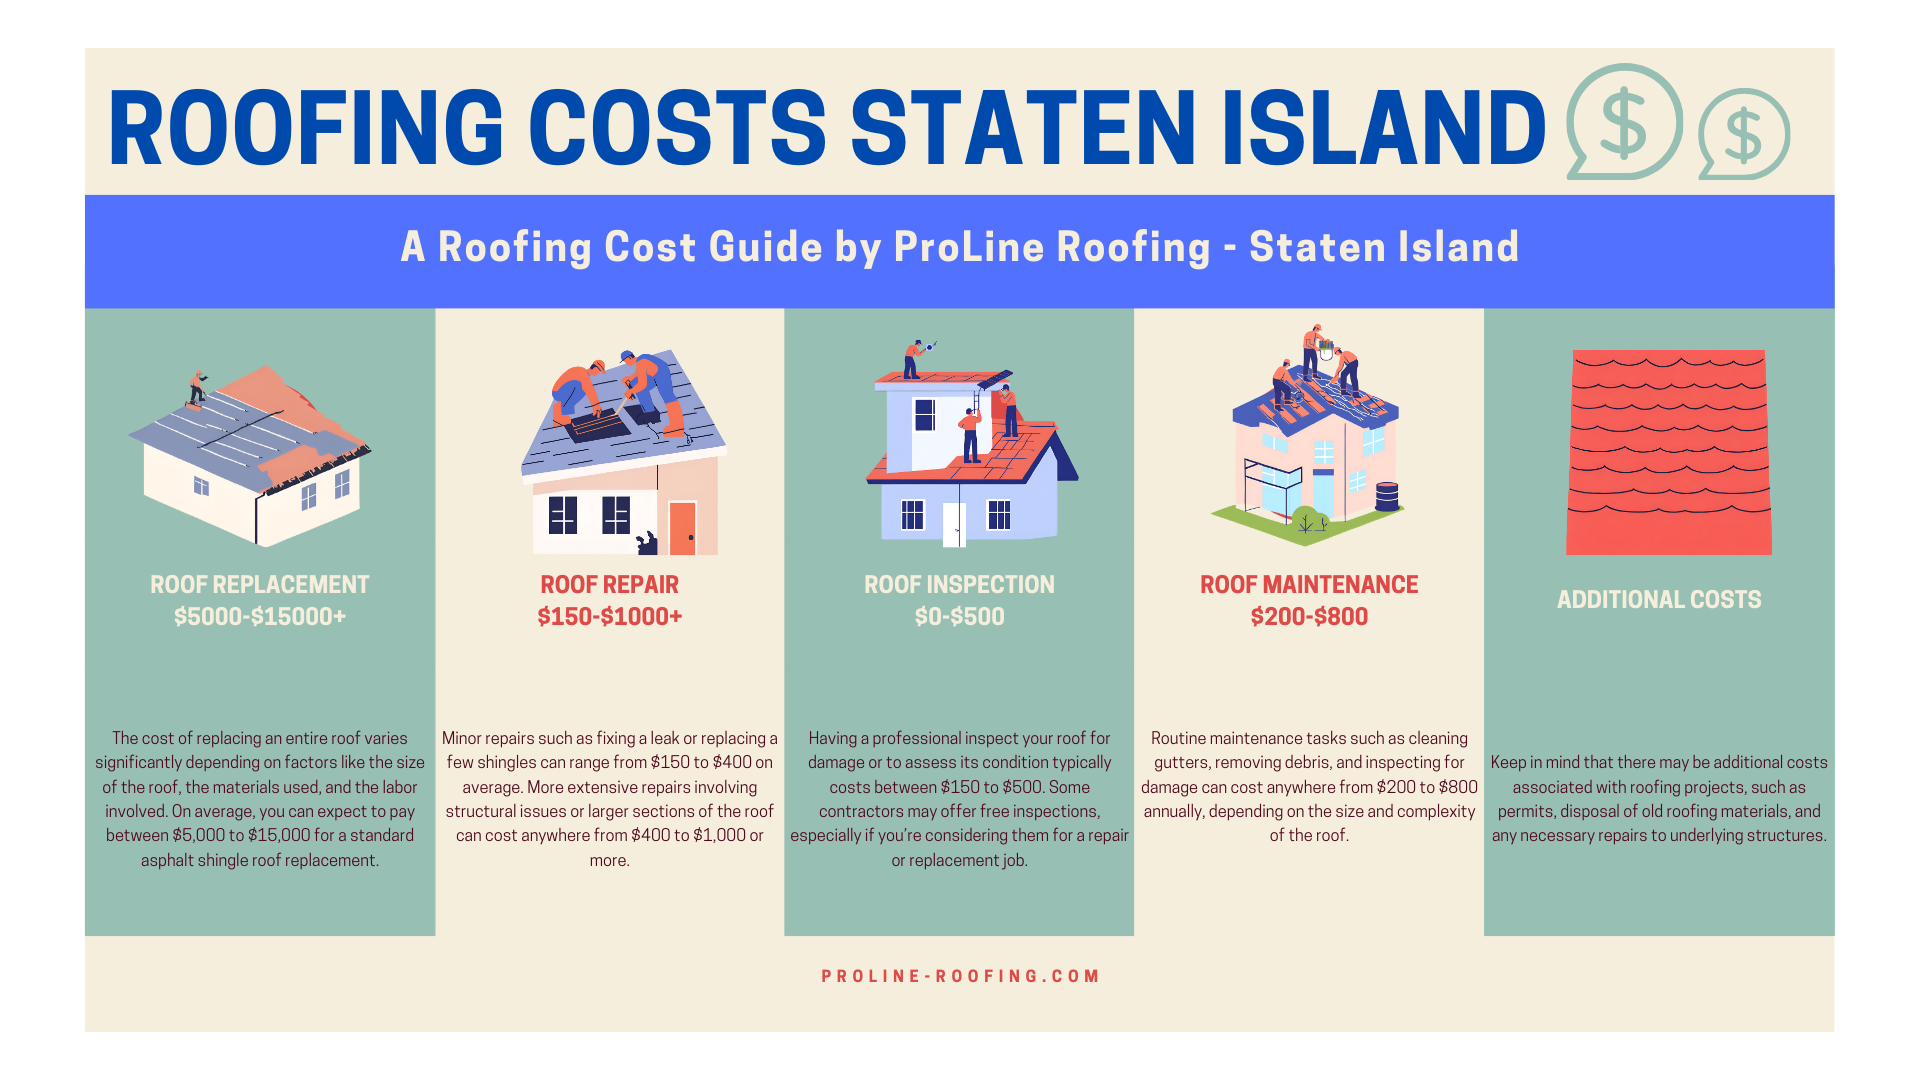 Roofing Costs in Staten Island Infographic by ProLine Roofing